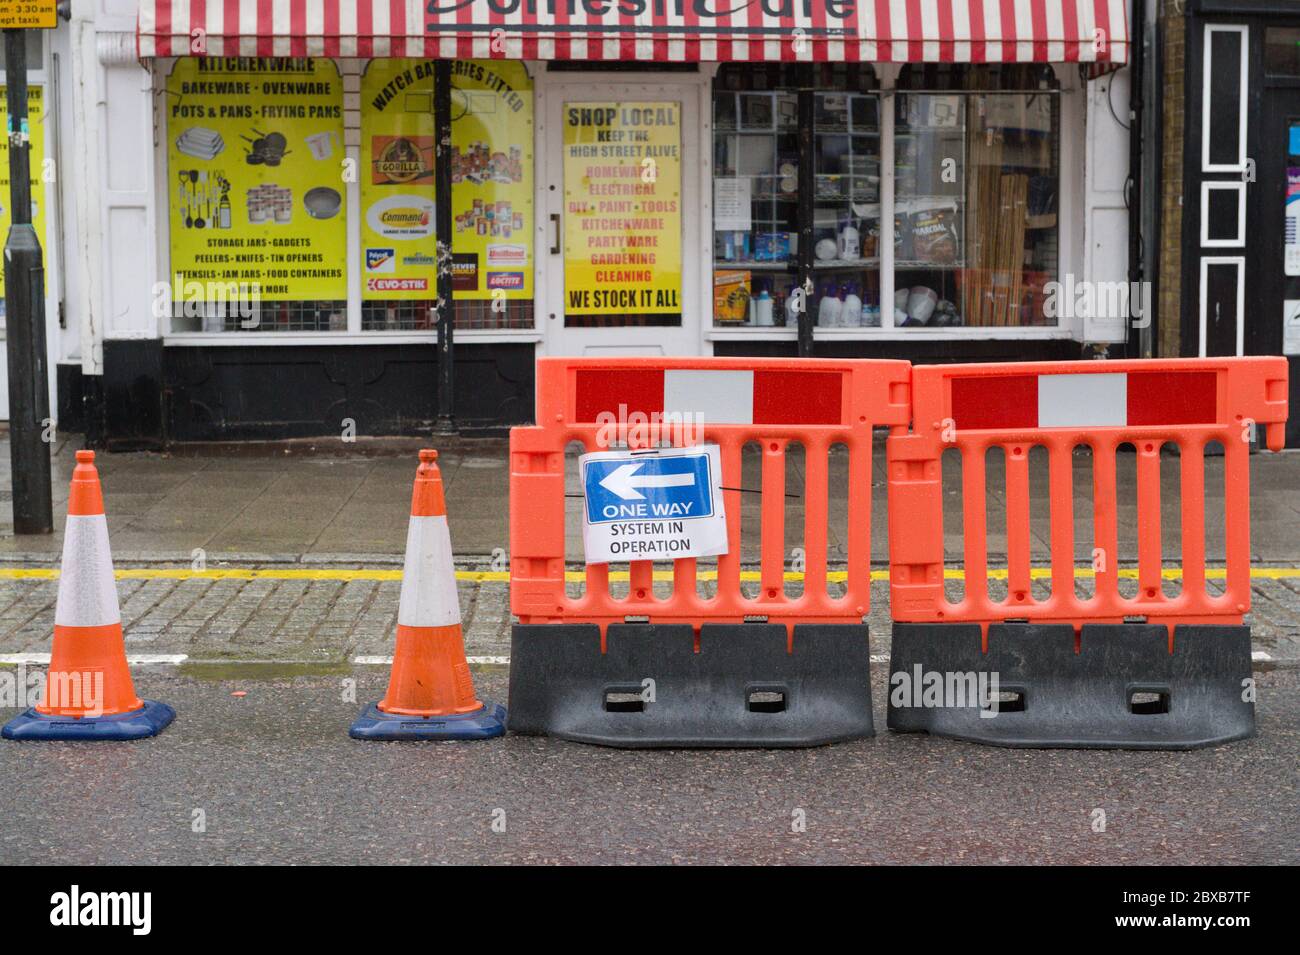 Ware, UK. 6th June, 2020. Rainfall and thunderstorms over Hertfordshire, UK. The main road through Ware has been turned in to a one way street to help with social distancing and to help prevent spread of coronavirus (COVID-19). Credit: Andrew Steven Graham/Alamy Live News Stock Photo